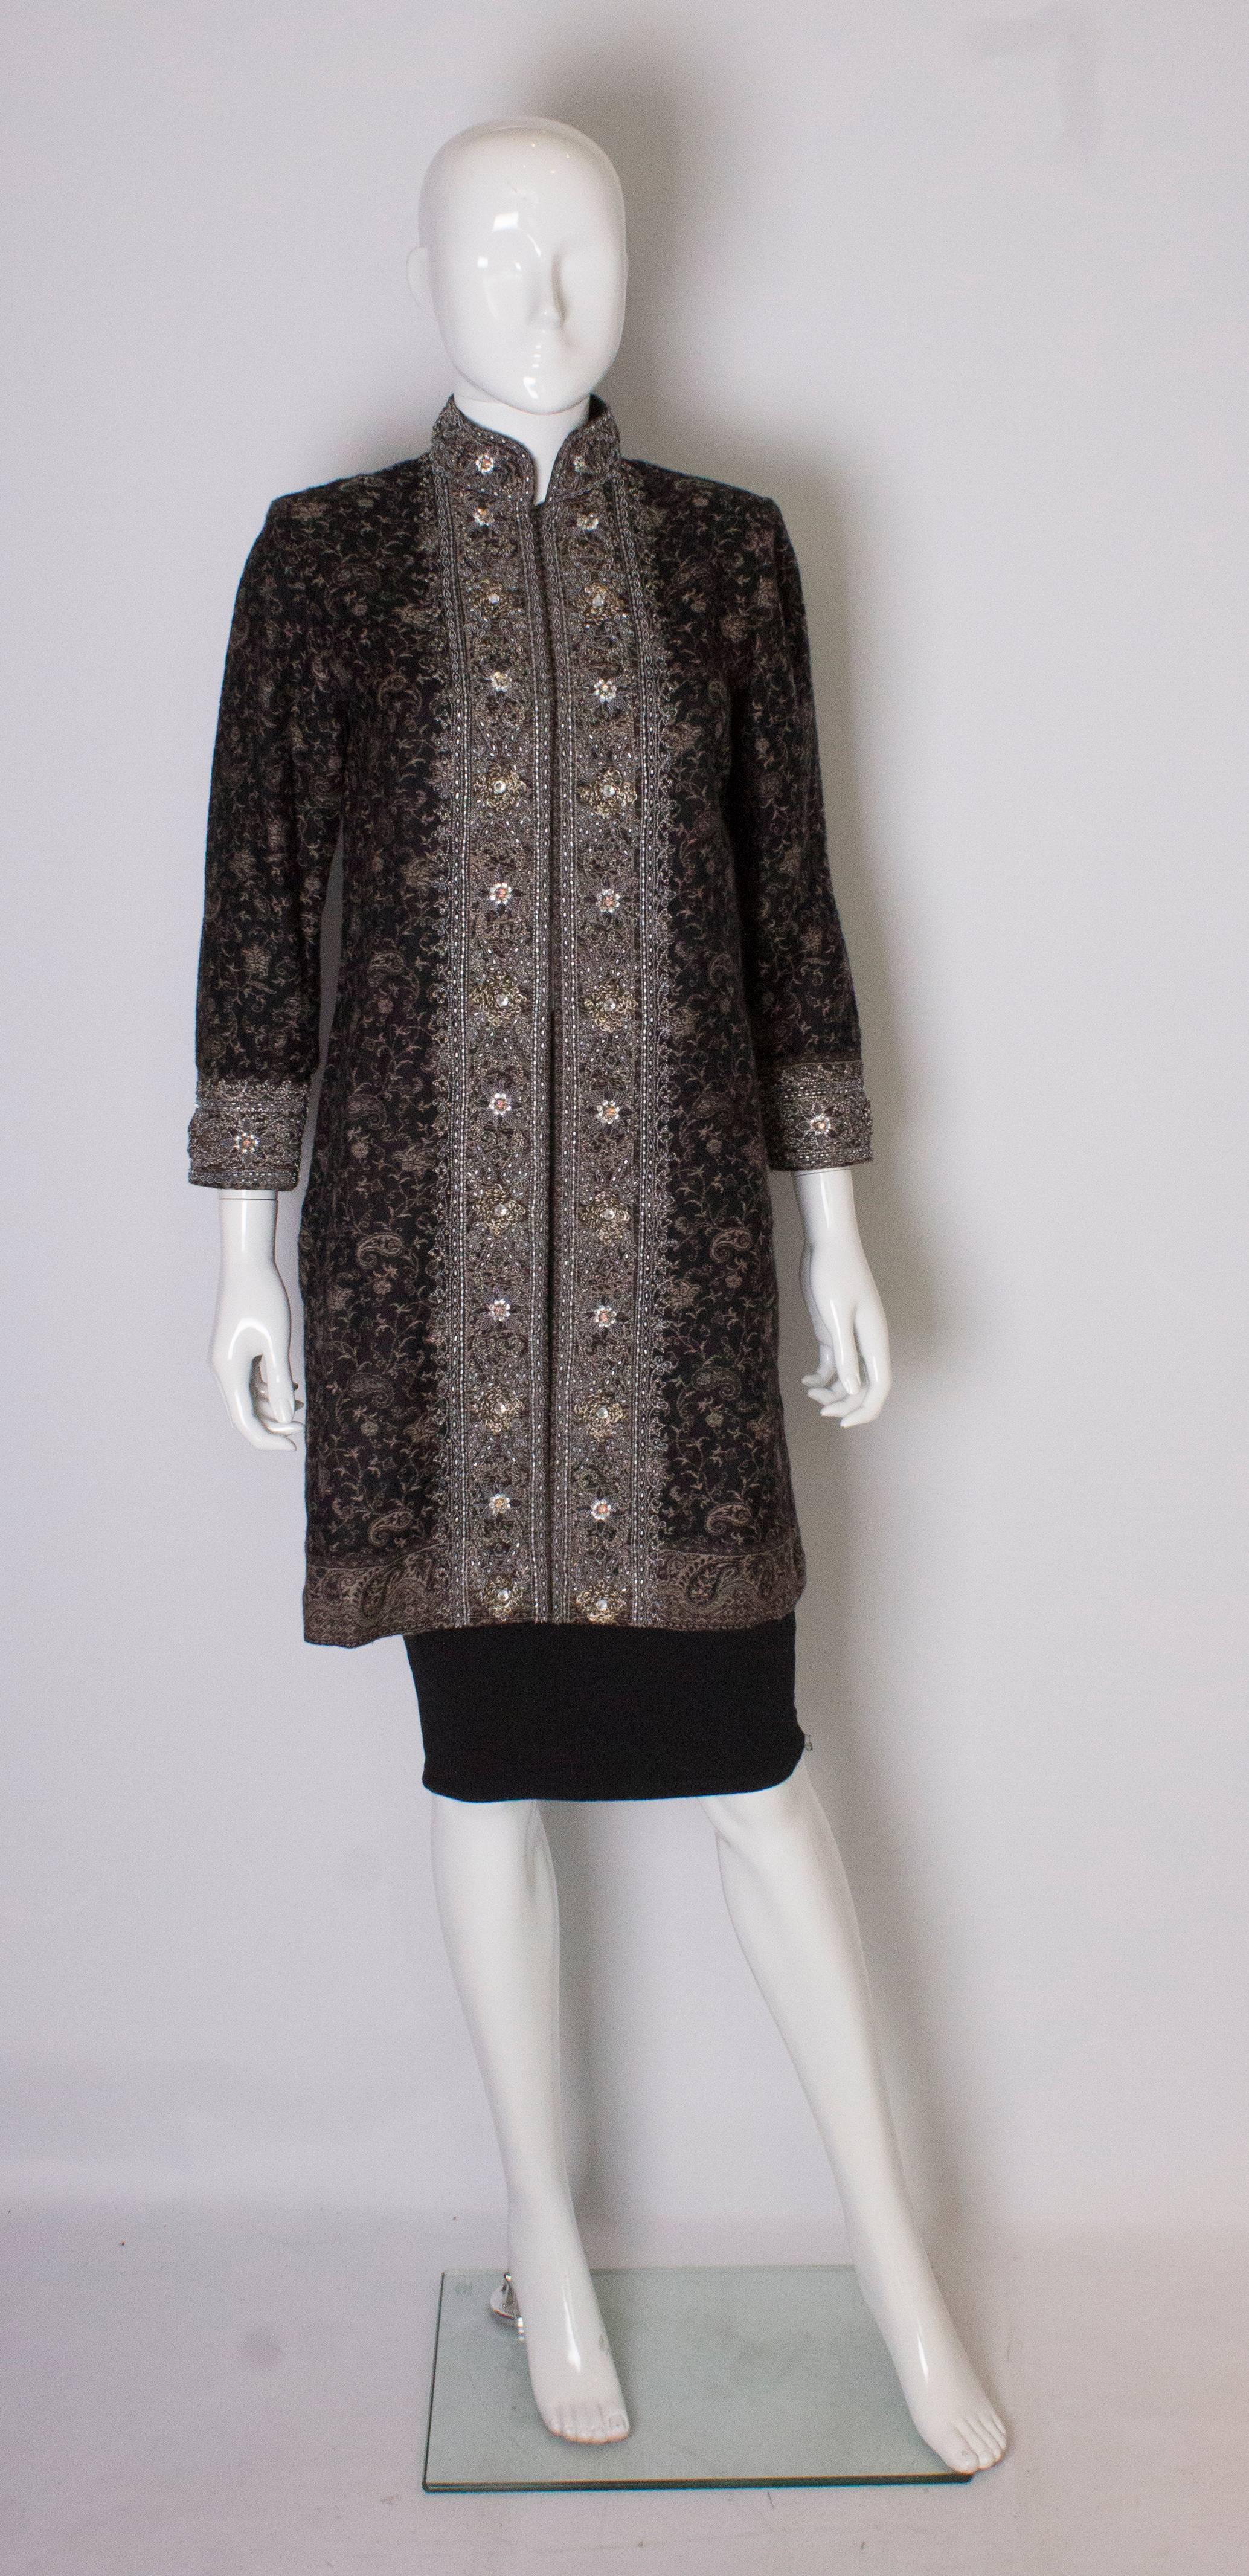 A chic  embroidered evening jacket. This jacket is in a black wool/kahsmir mix with a beige floral design. It has  embroidery detail on the collar and cuffs, with 12'' slits on each side.